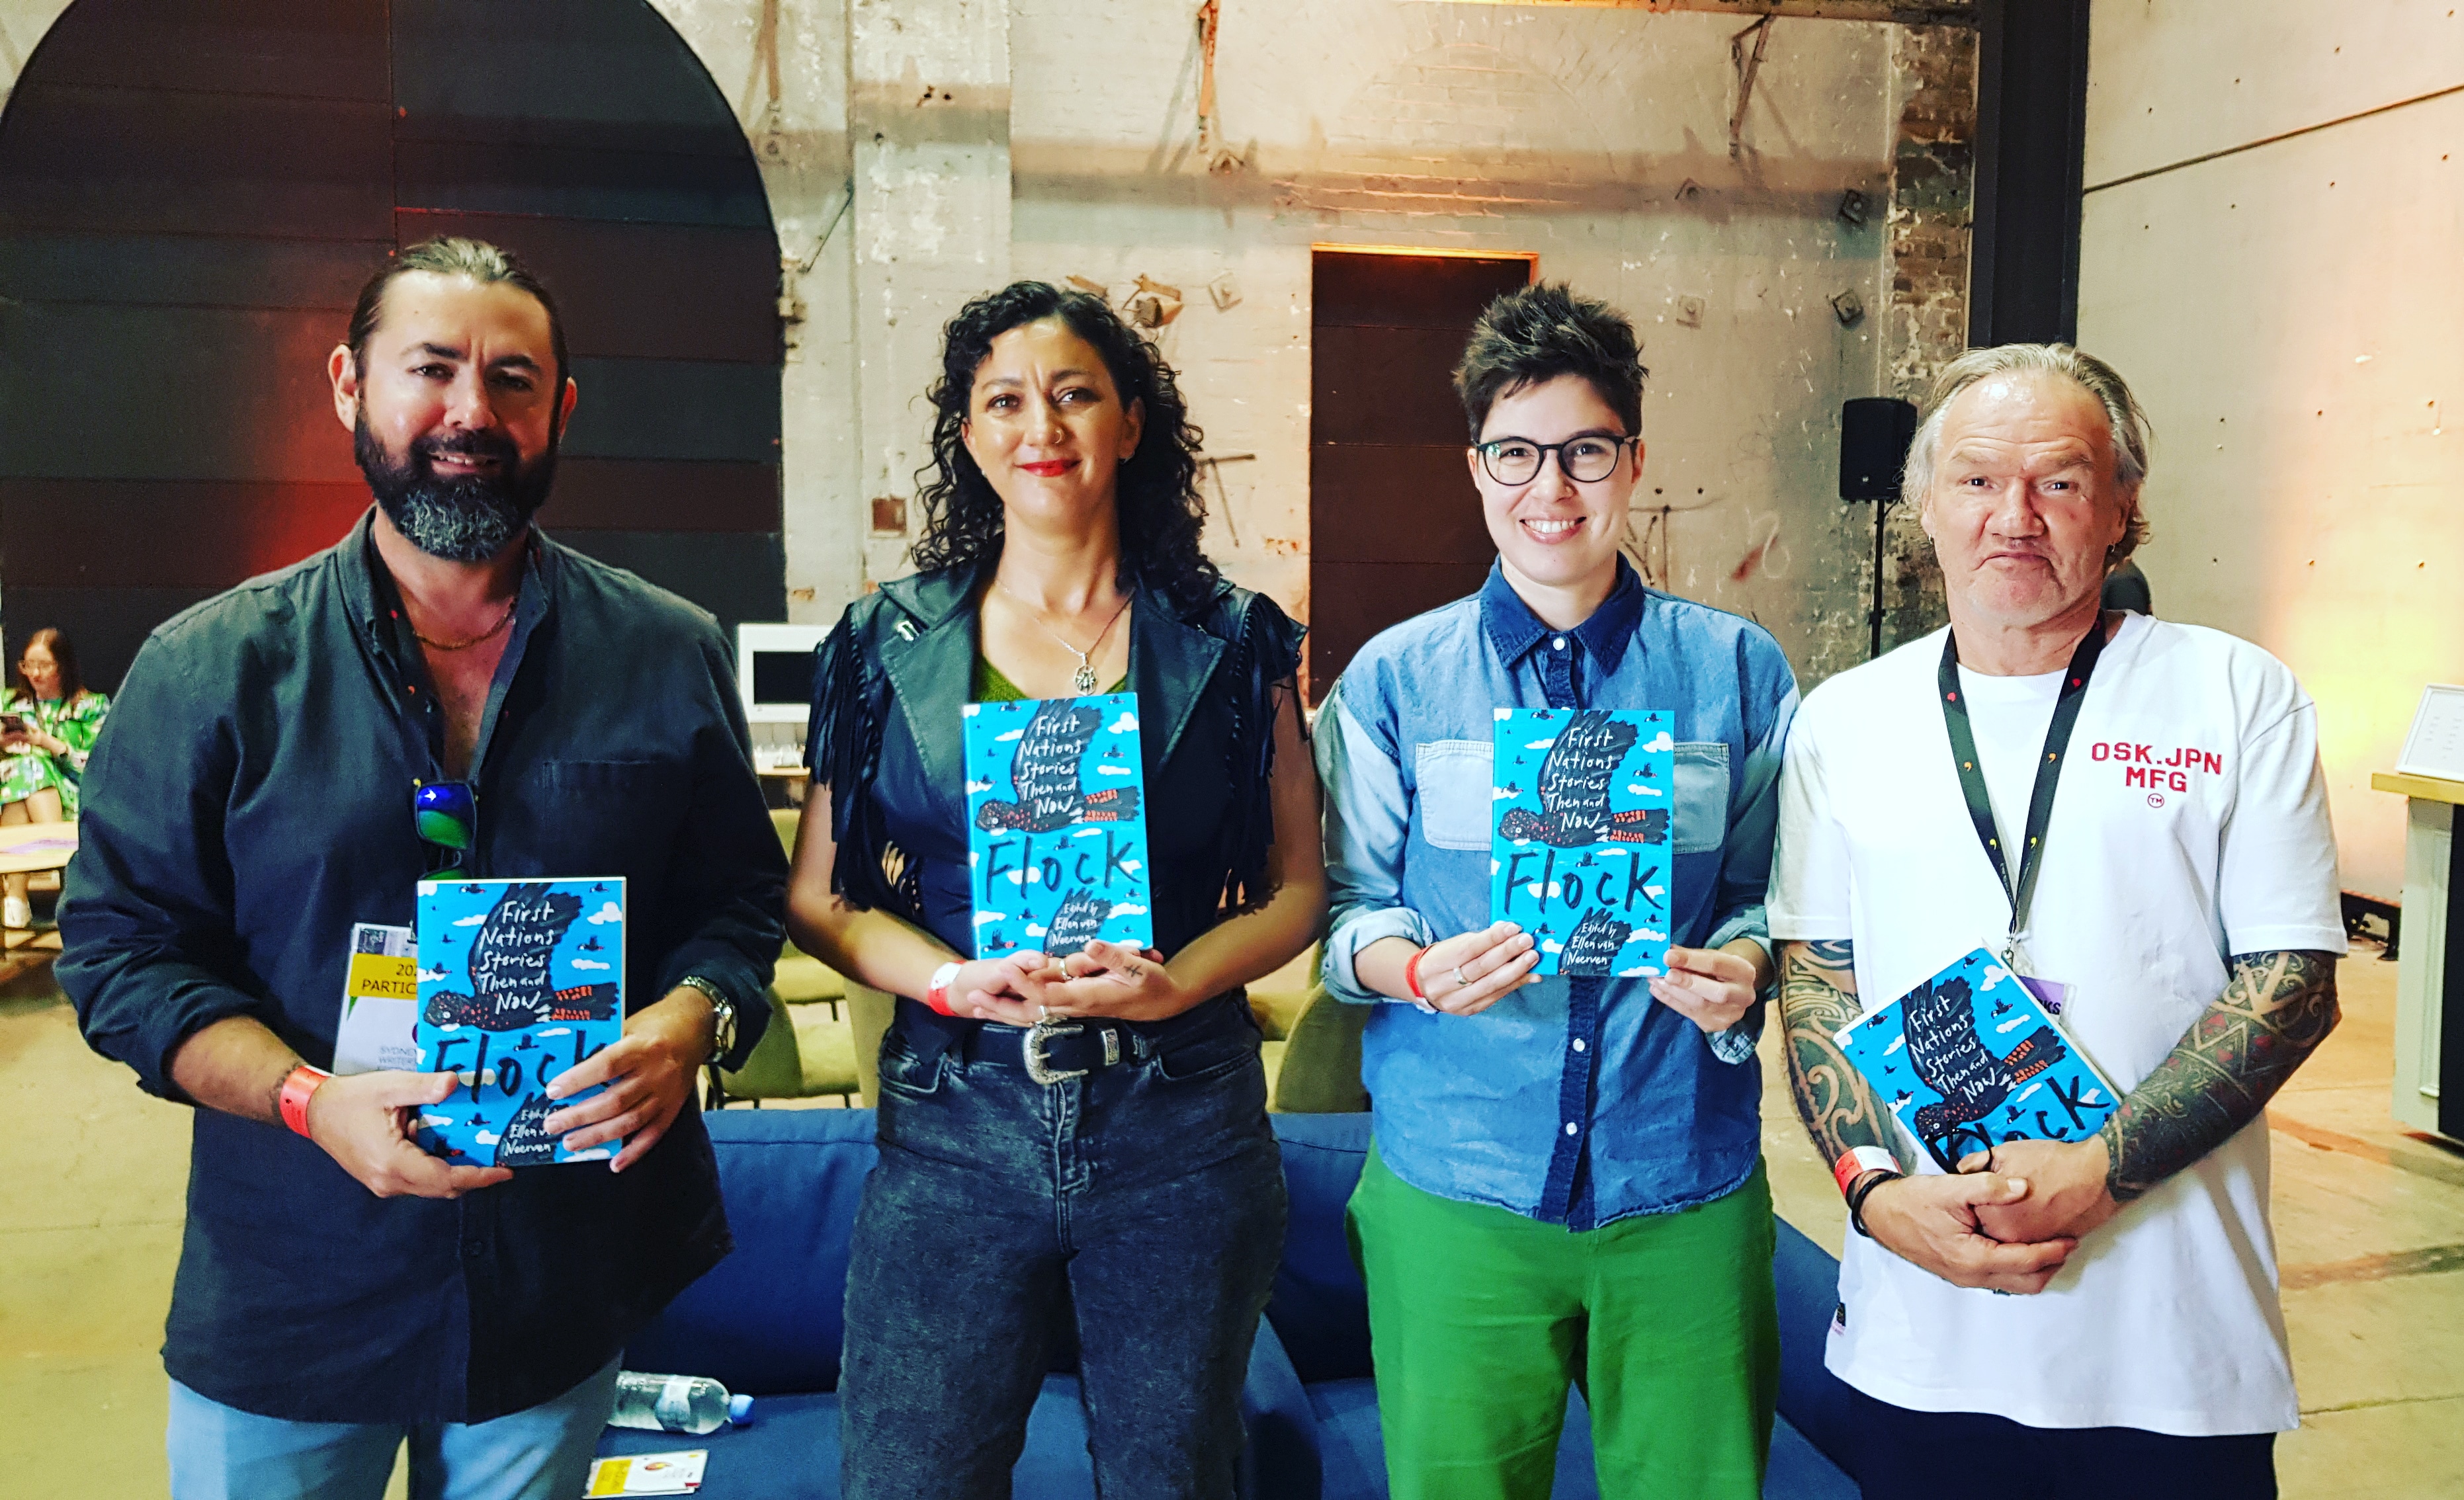 UQP authors Adam Thompson, Mykaela Saunders, Ellen van Neerven and Tony Birch pose with copies of Flock: First Nations Stories Then and Now. The anthology has a blue cover, with a sihlouette of a bird in flight.